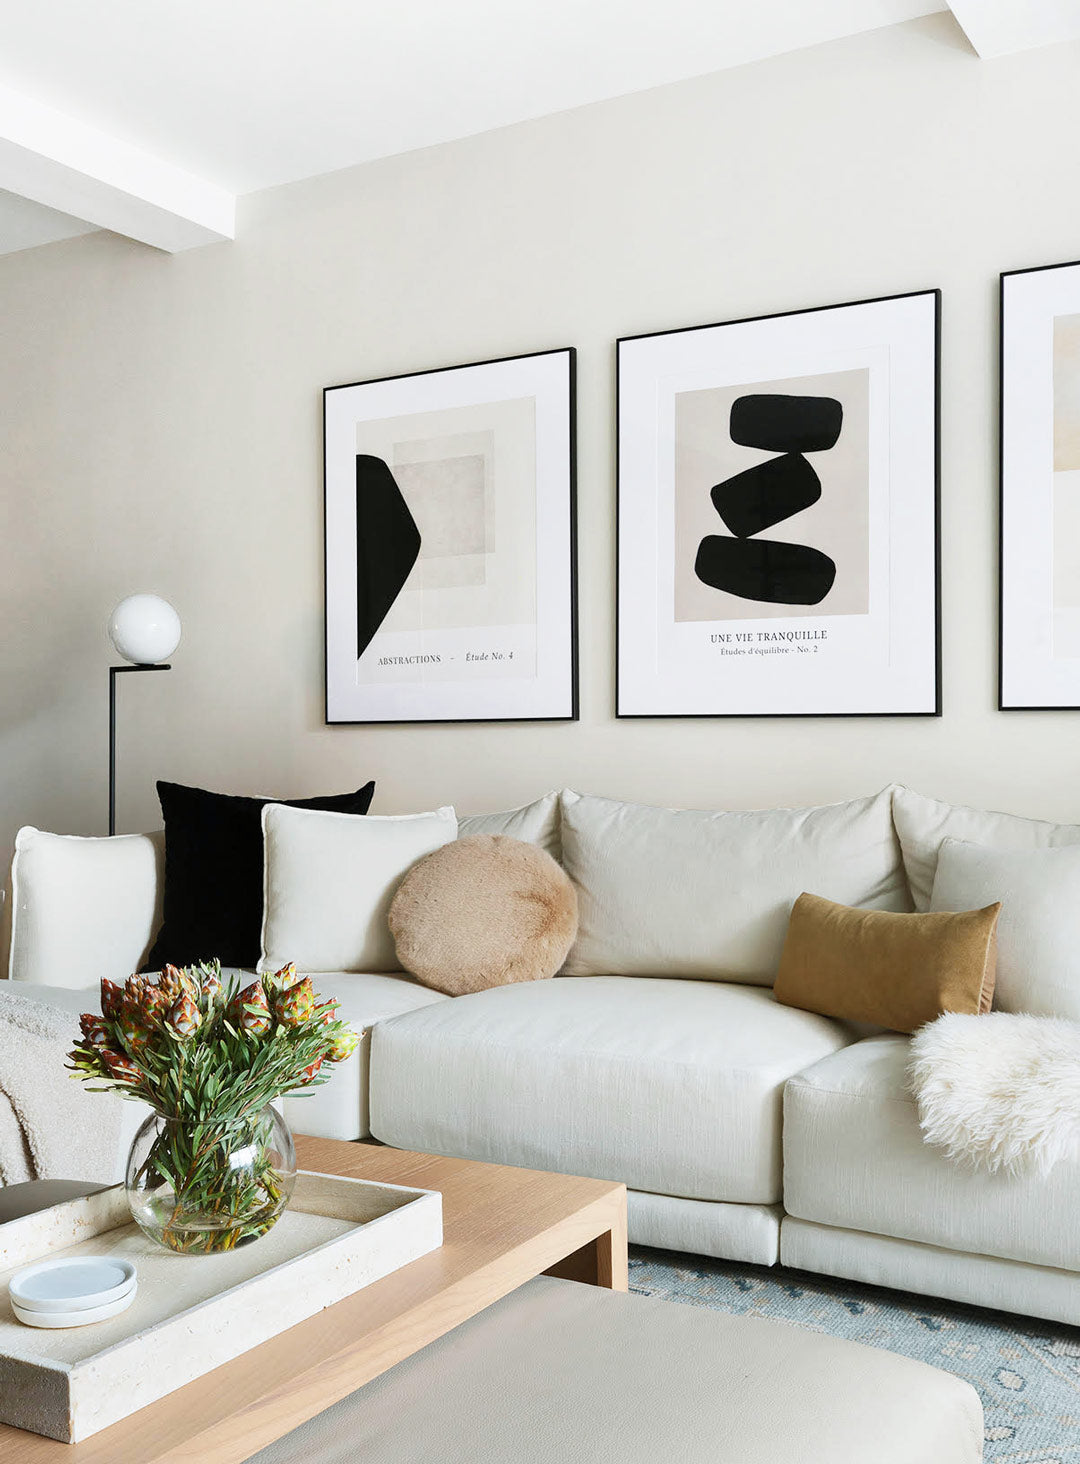 The neutral color palette in this modern family living room is Clare’s light beige interior wall paint named Classic.